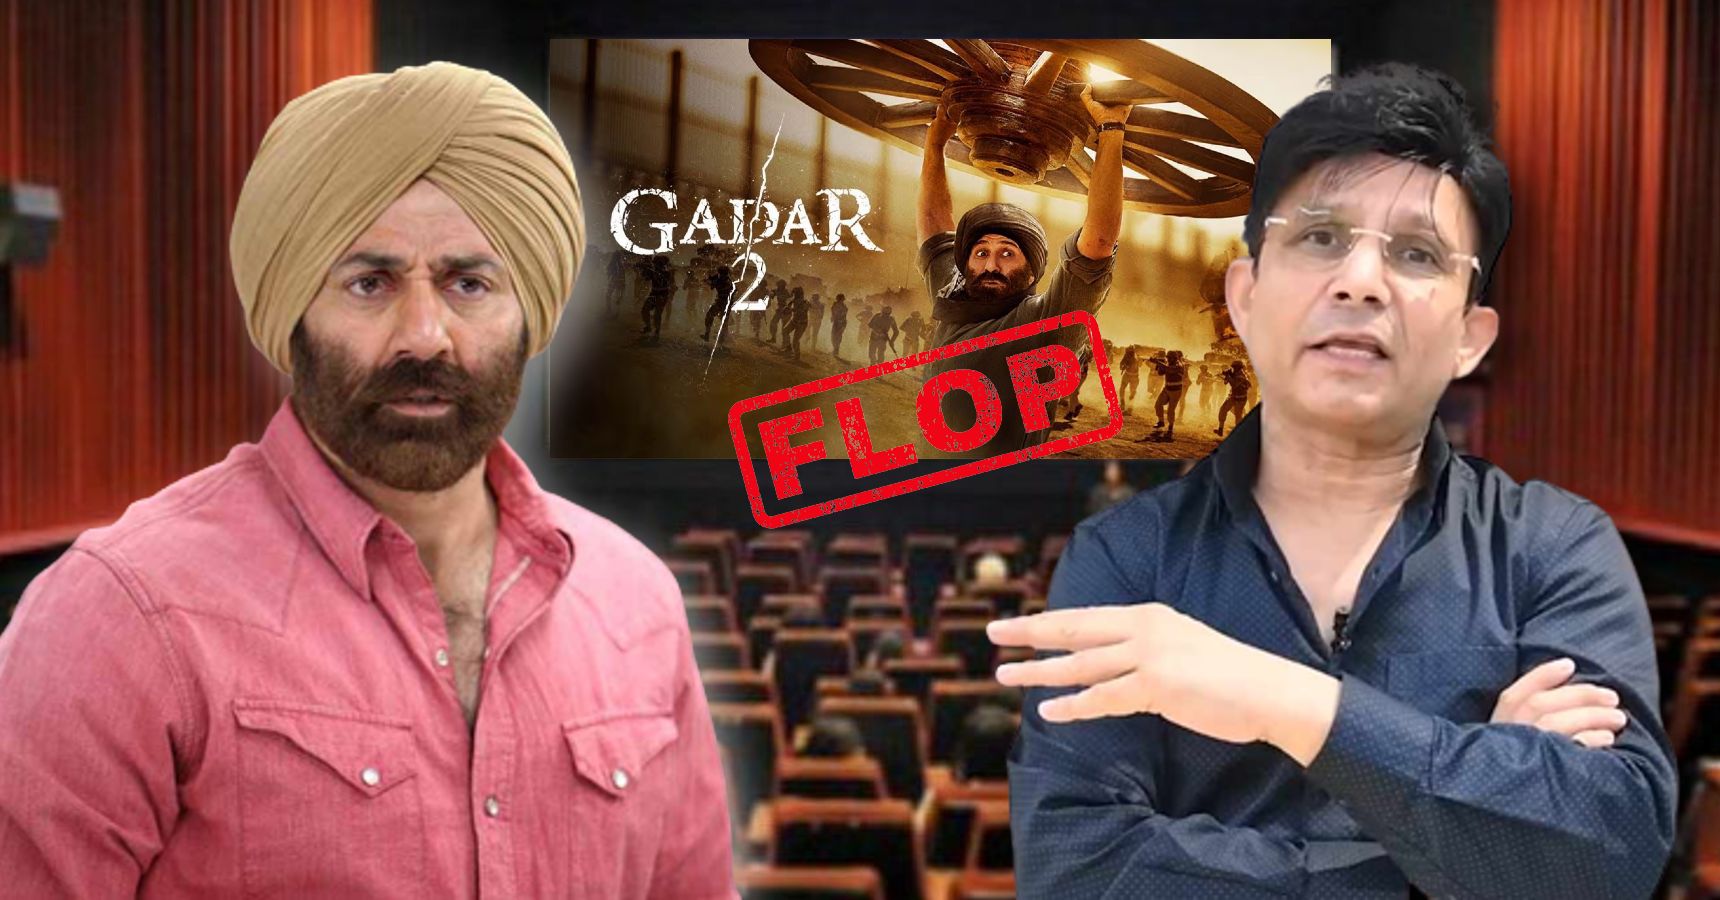 KRK Claims Sunny Deol’s Gadar 2 movie box office collections are fake